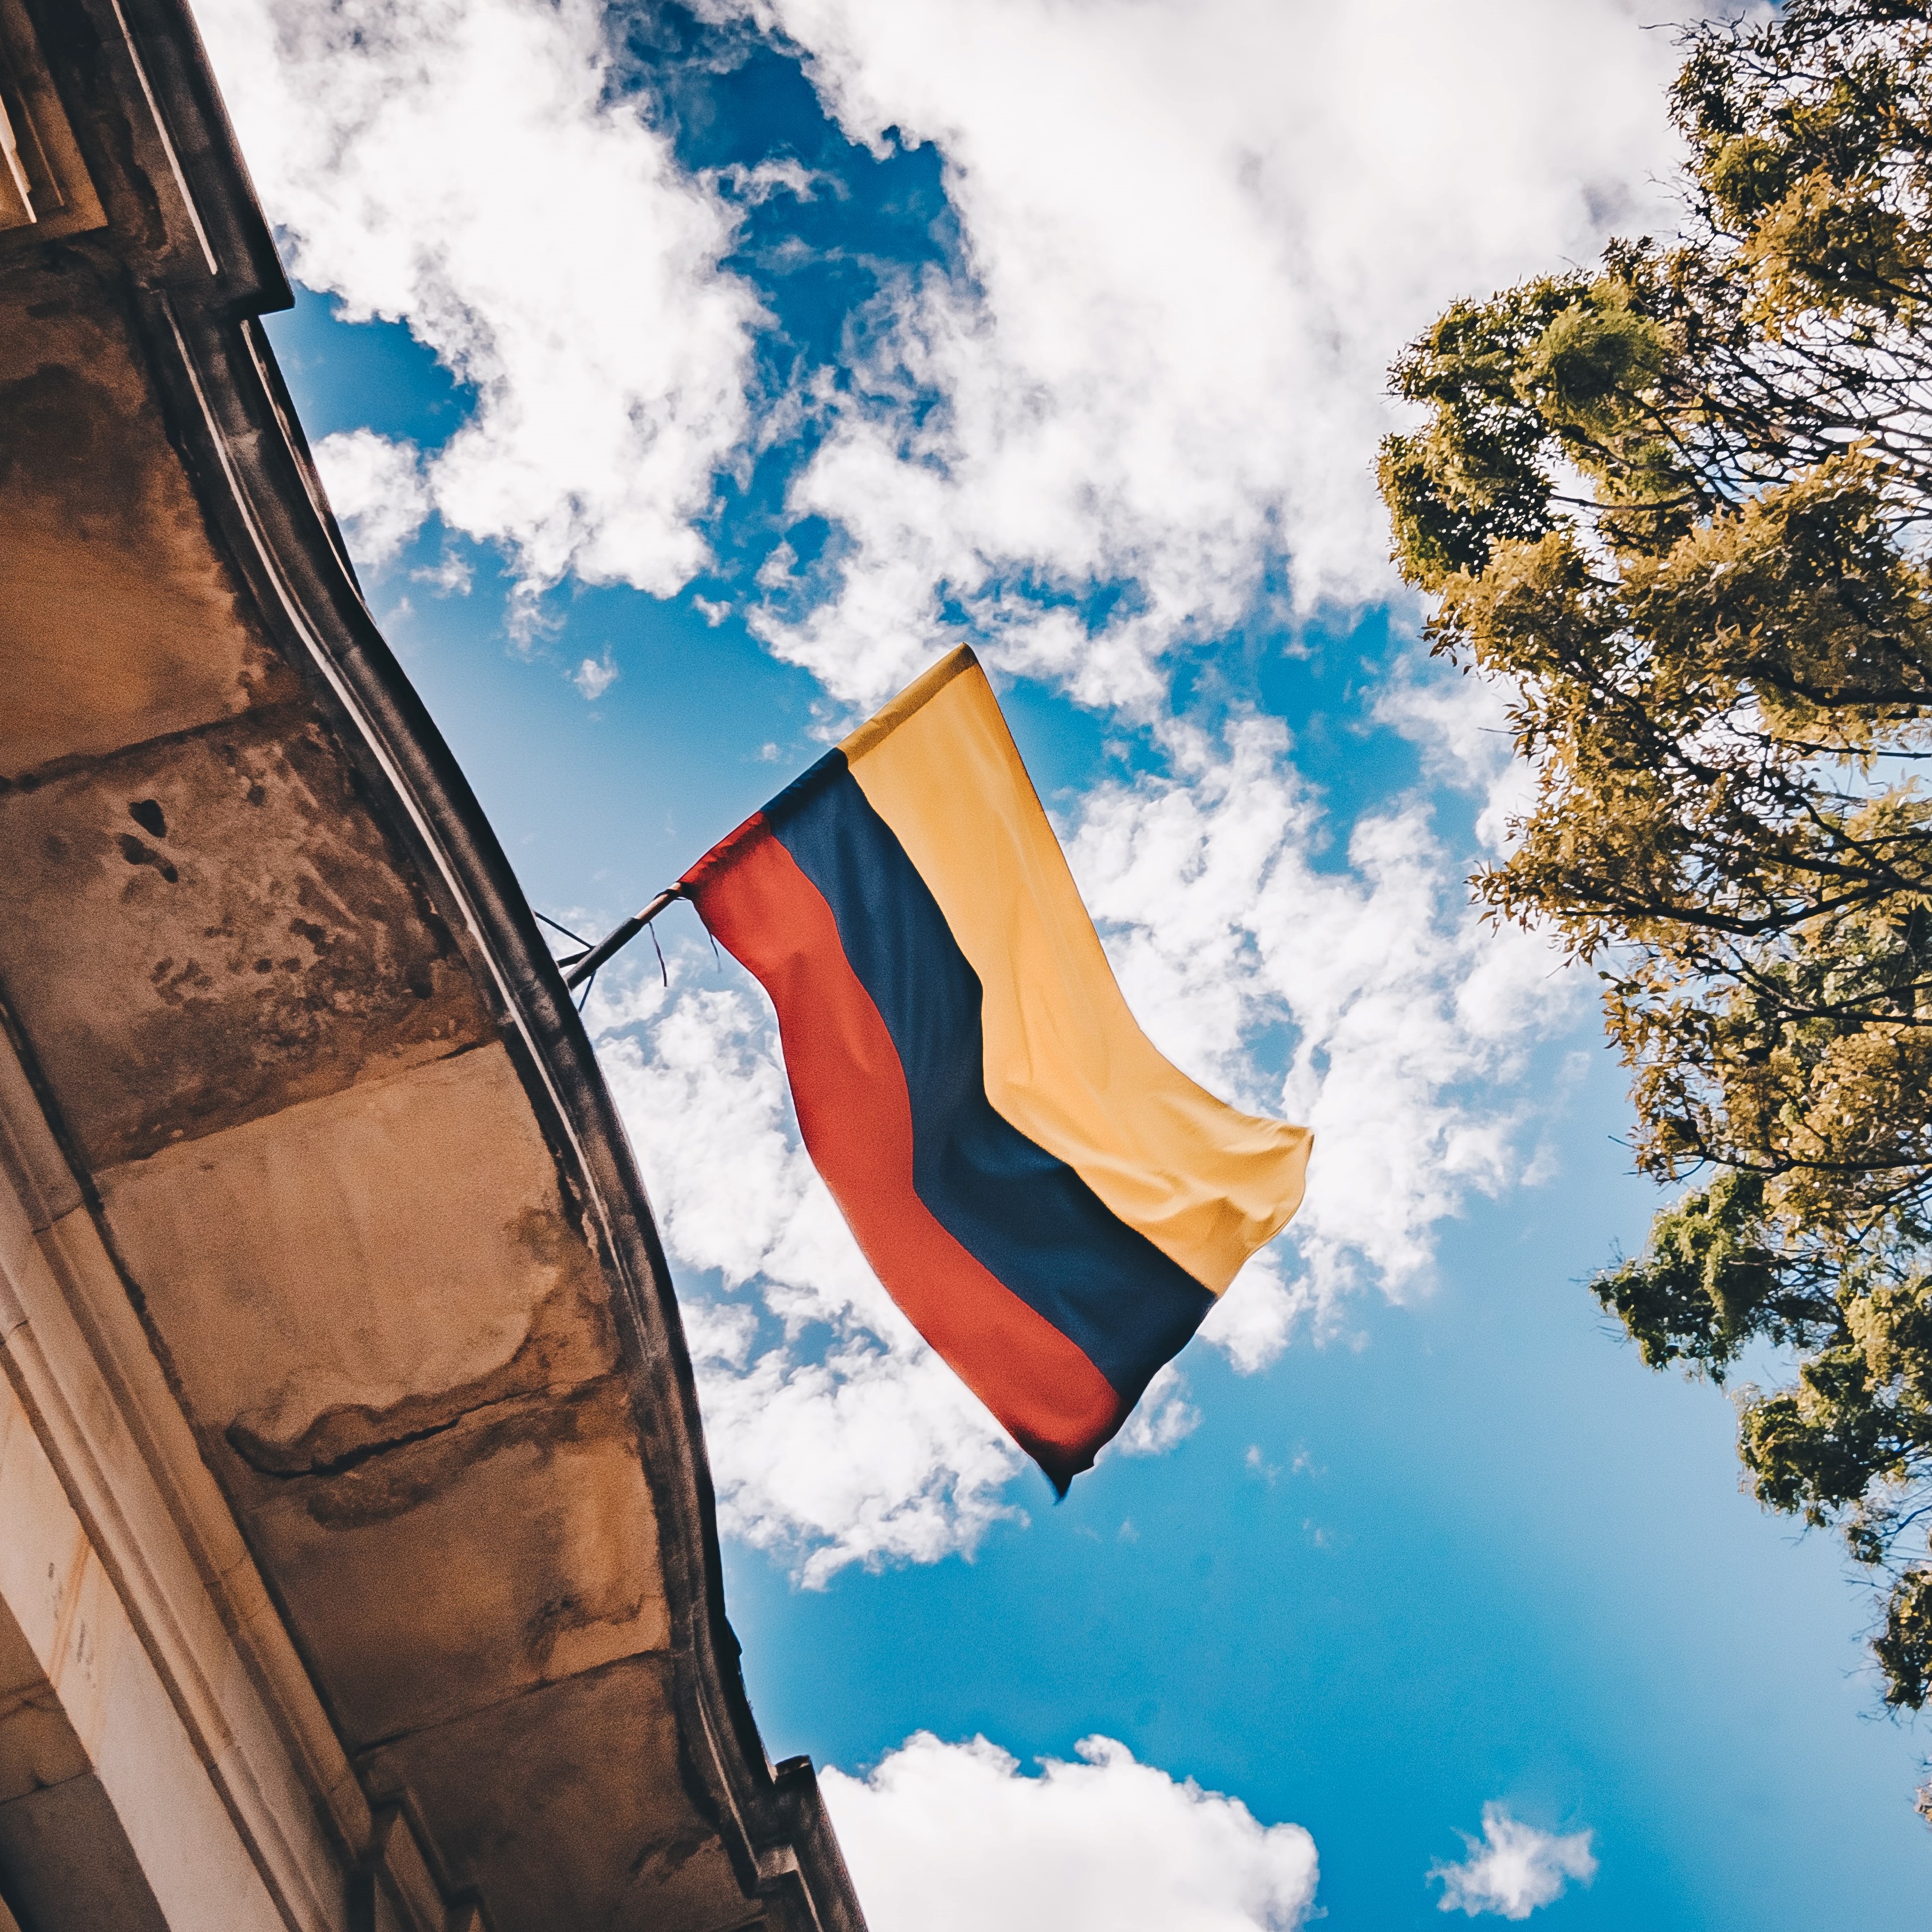 After more than 500 days of deliberation, Colombia decriminalizes abortion